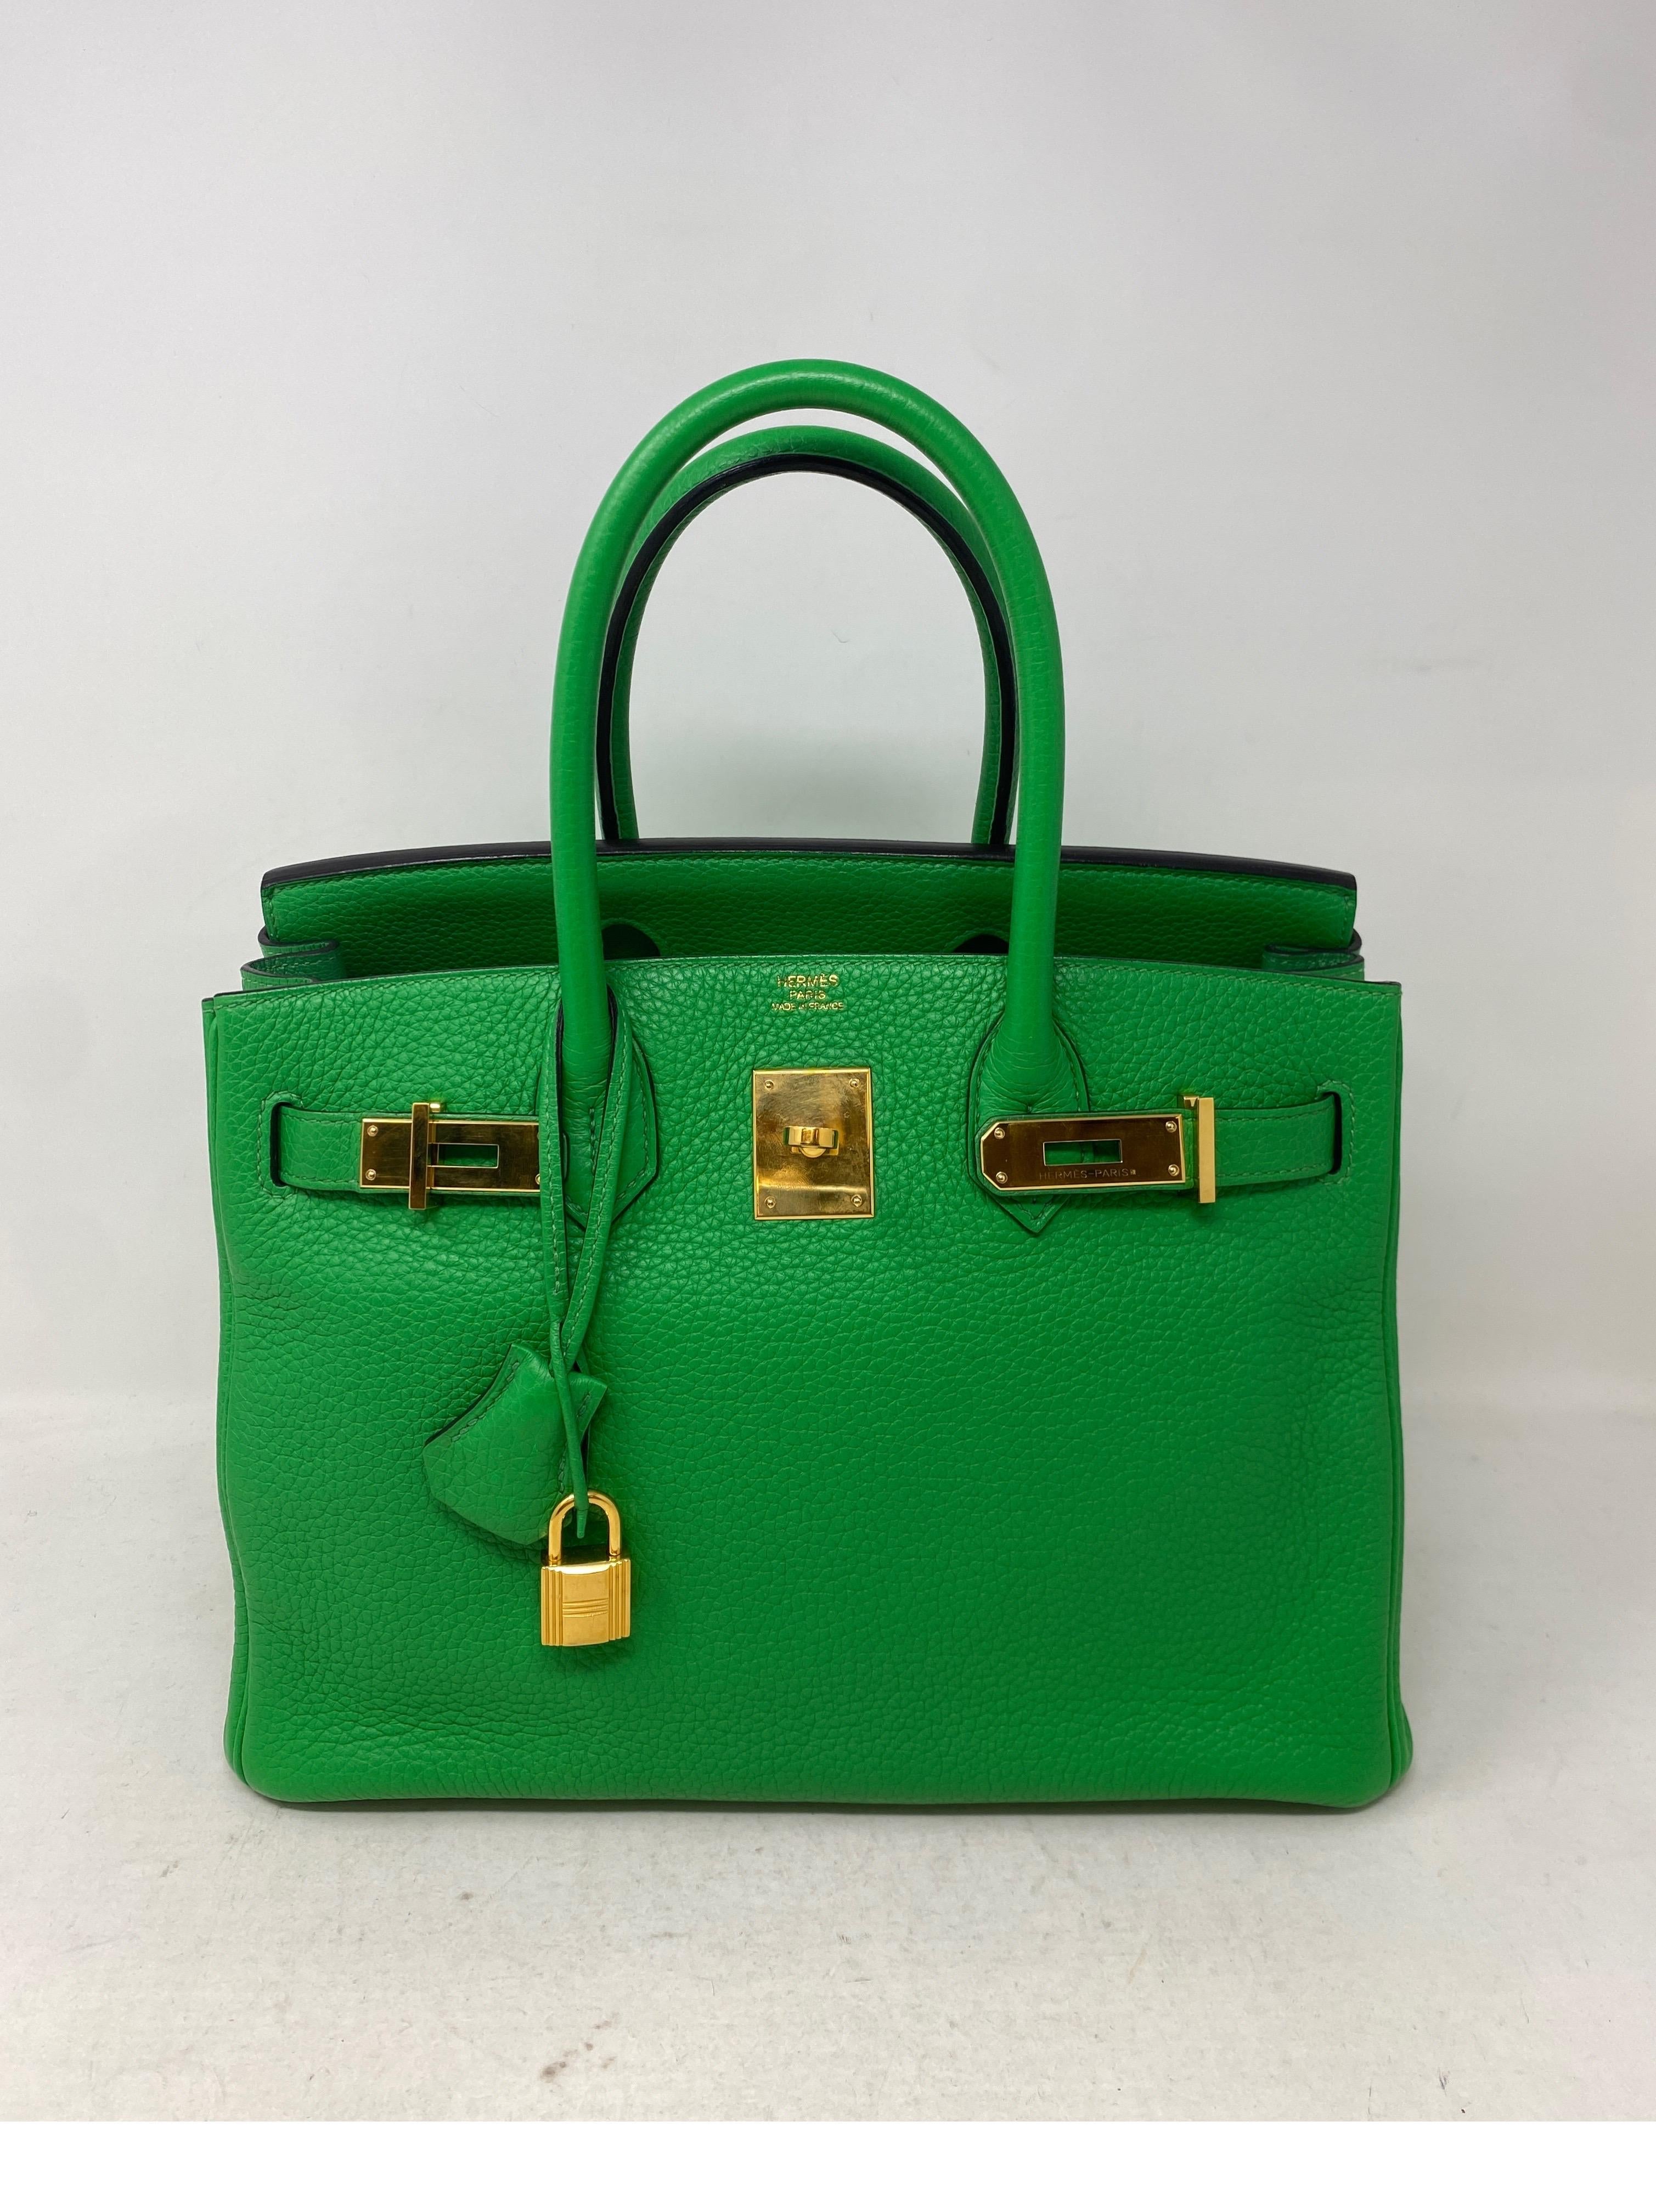 Hermes Bamboo Birkin 30 Bag. Rare bamboo green color clemence leather bag. Gold hardware. Excellent condition. Clean interior. Includes clochette, lock, keys, and dust bag. Guaranteed authentic. 